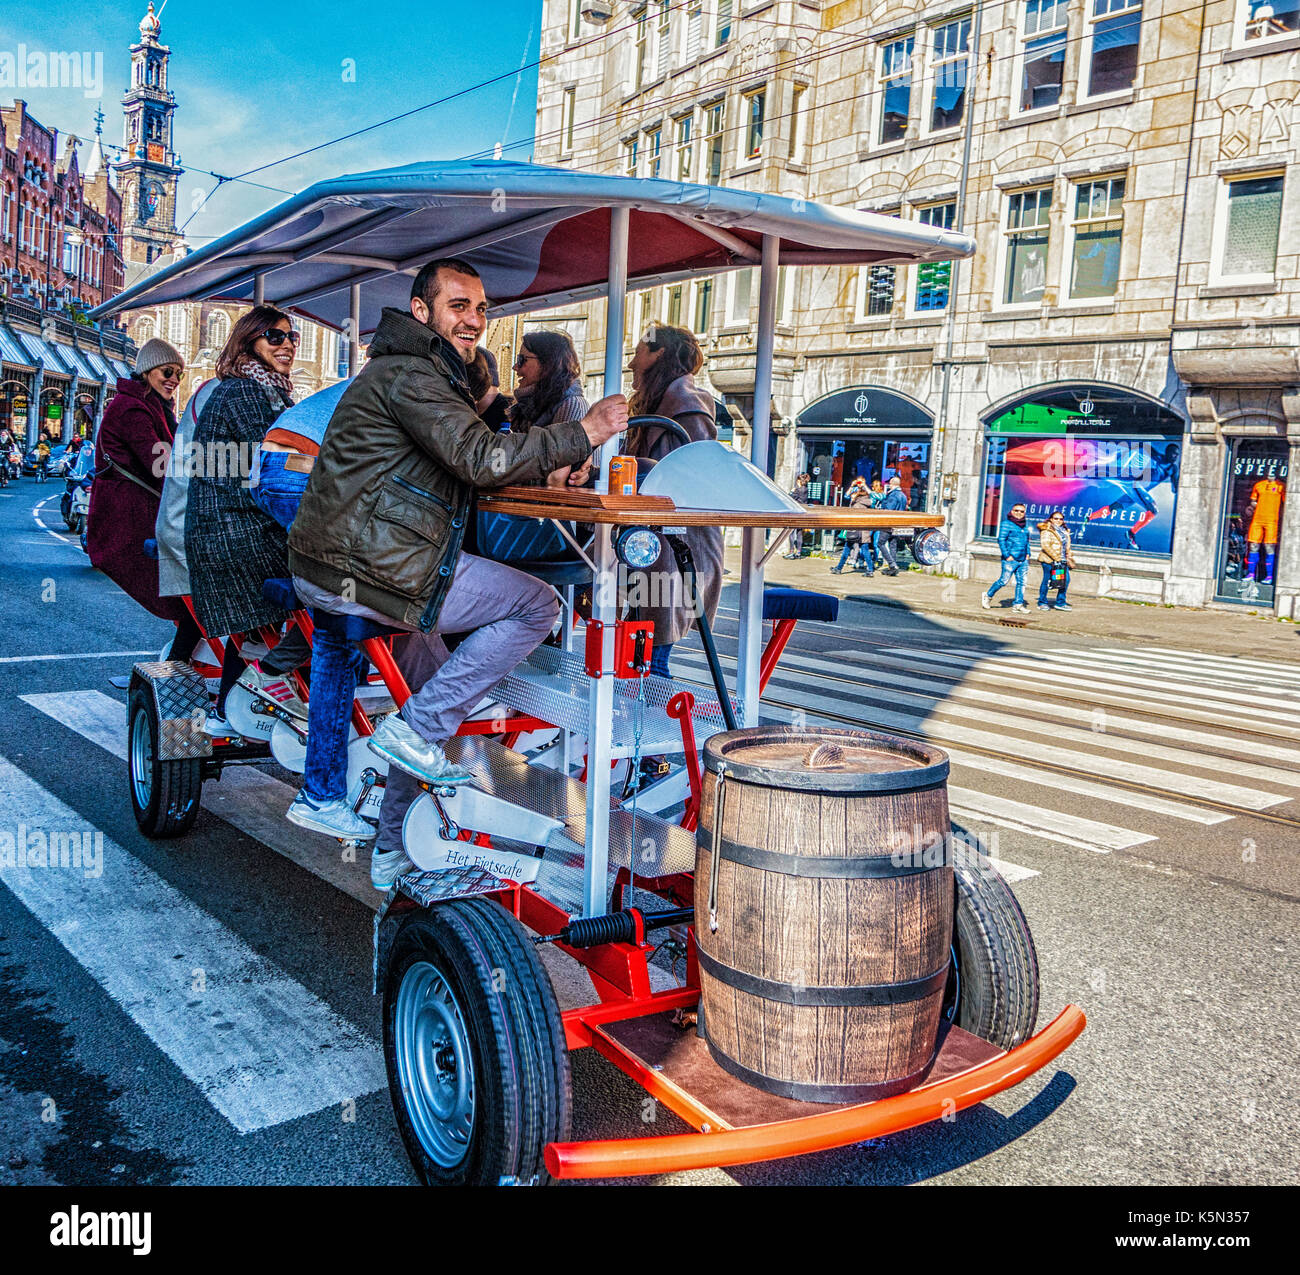 Amsterdam, Netherlands - Mar 26, 2016: Mobile peddle driven tavern drives down street Stock Photo